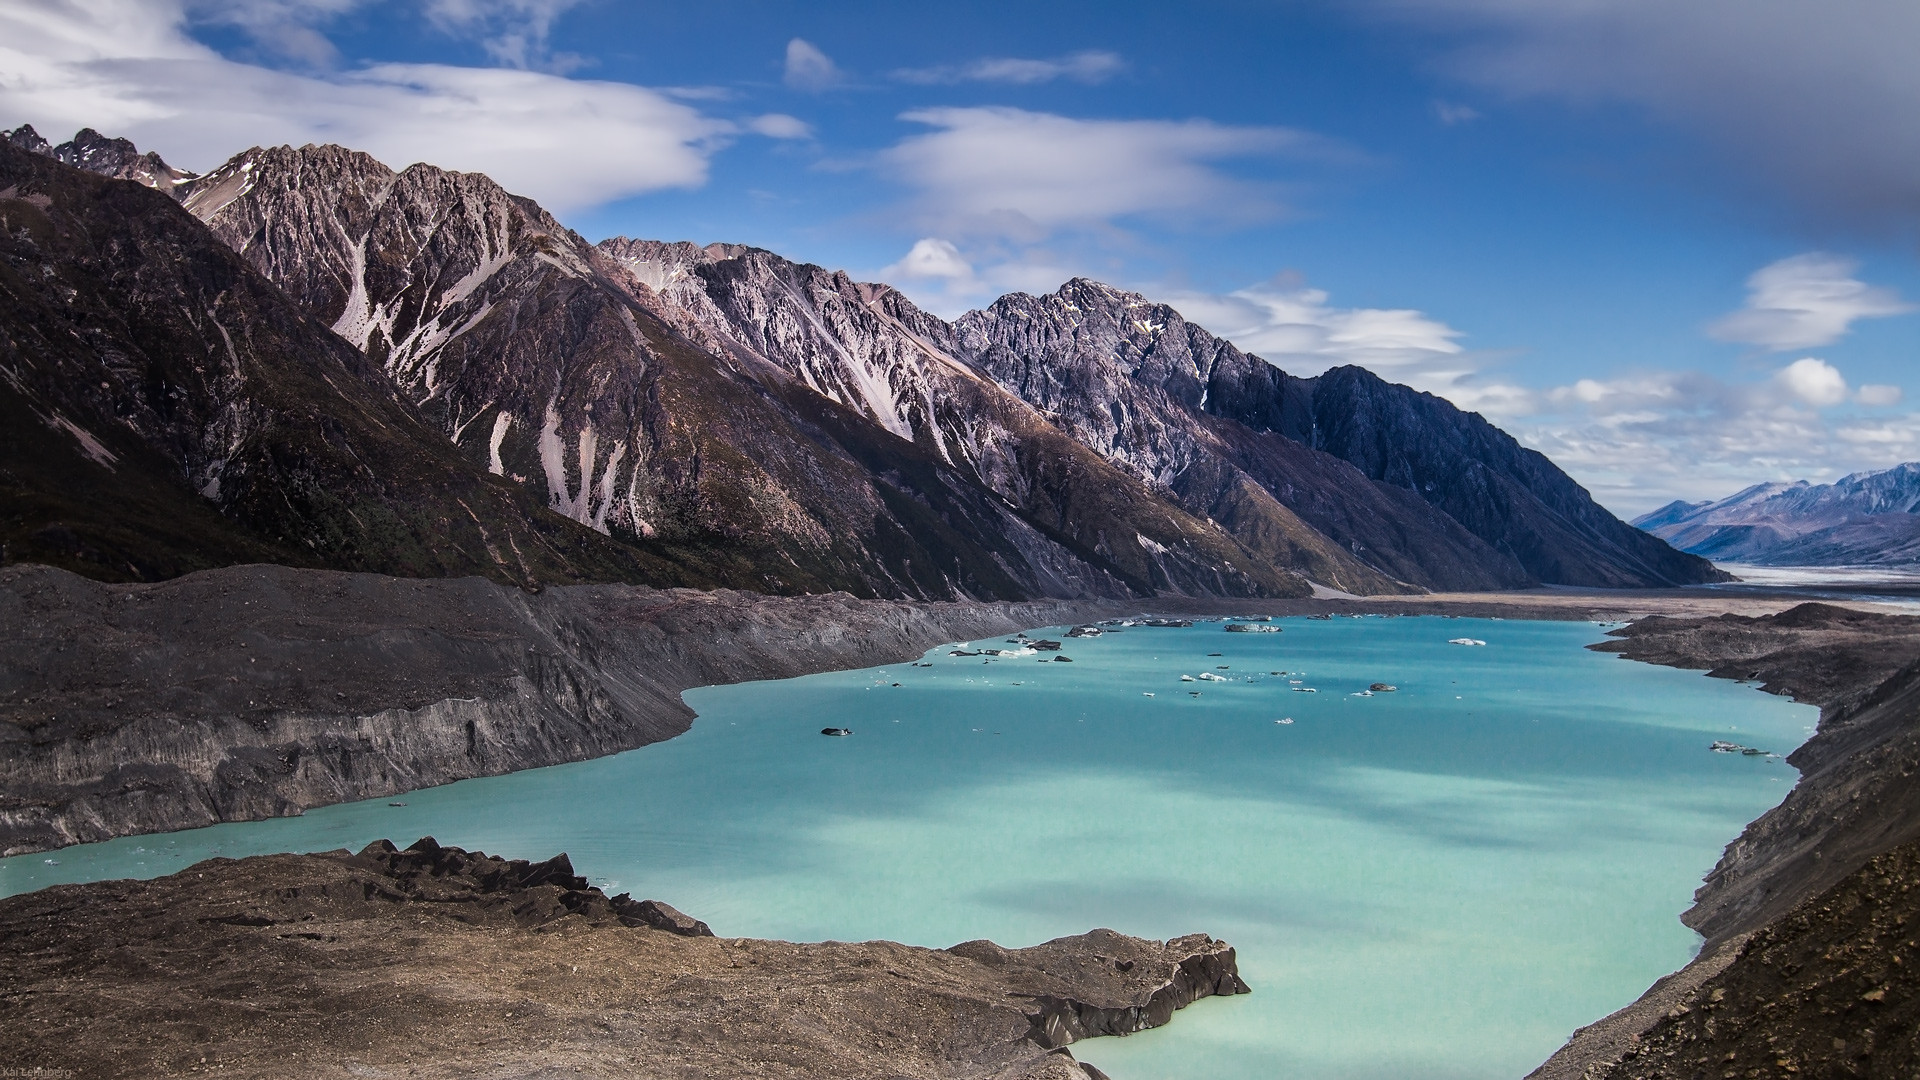 Tasman Lake is a proglacial lake created by the current retreat of the Tasman Glacier in New Zealand’s South Island.